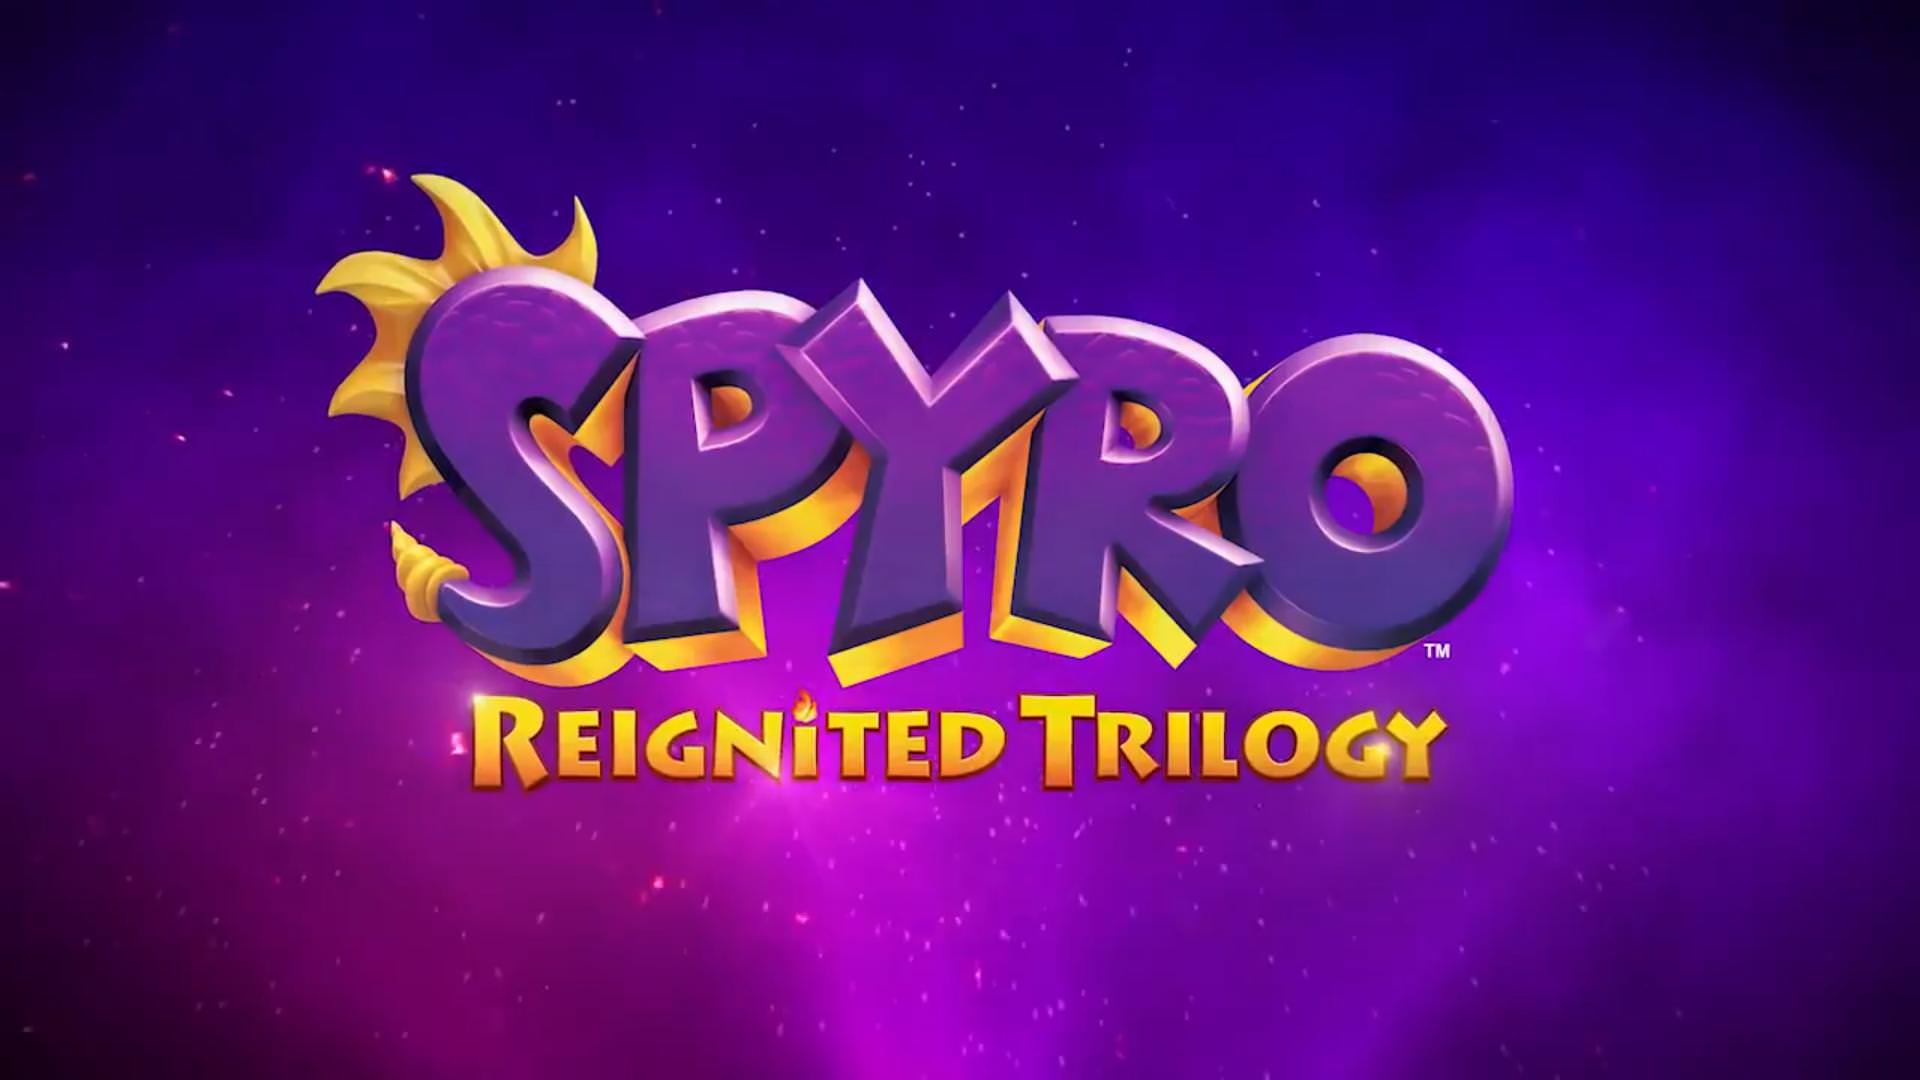 Spyro Reignited Trilogy Wallpapers - Wallpaper Cave